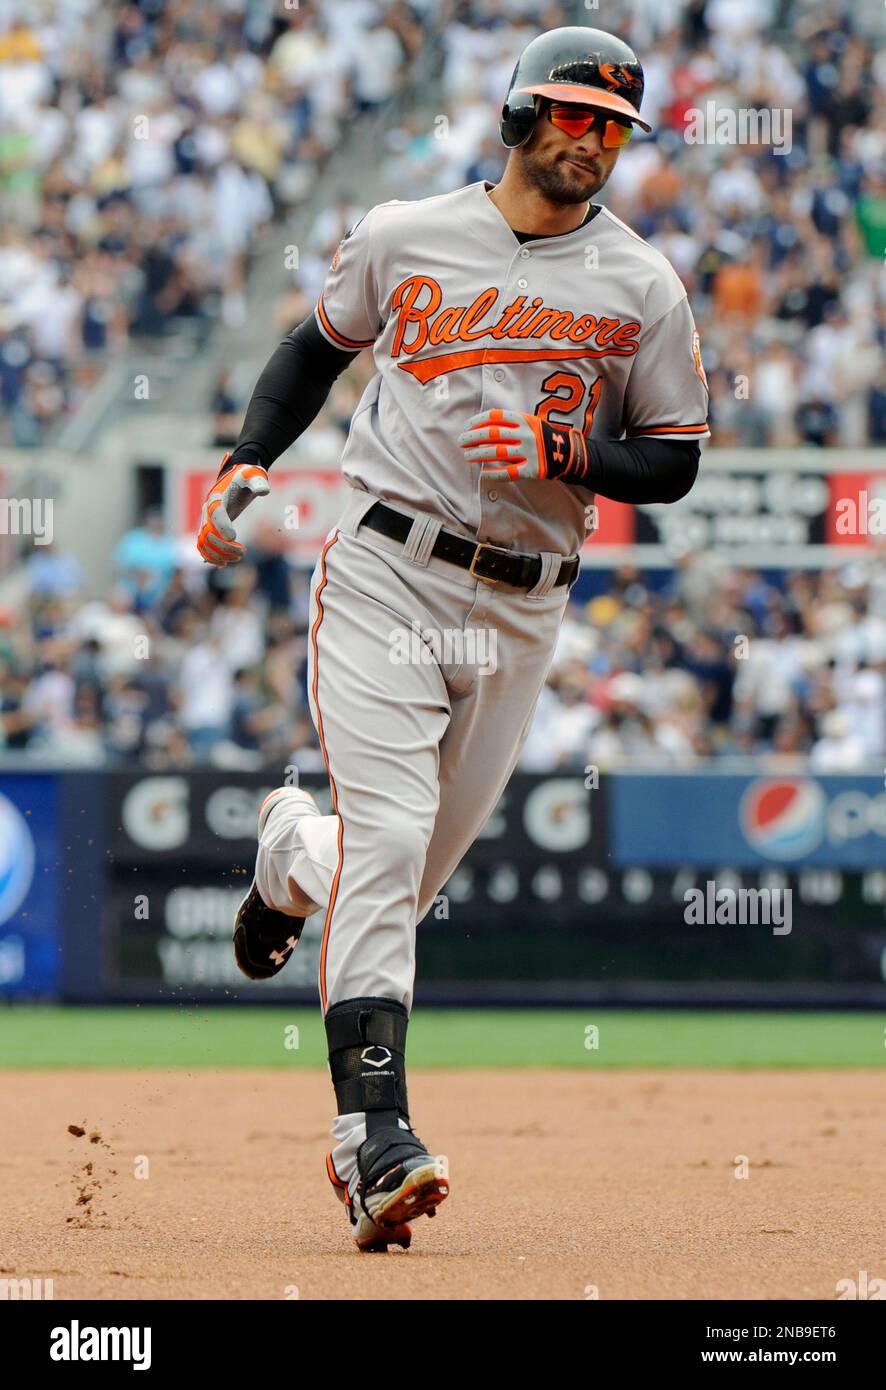 Baltimore Orioles' Nick Markakis rounds the bases after hitting a home run  during the first inning of a baseball game New York Yankees Monday, Sept.  5, 2011 at Yankee Stadium in New